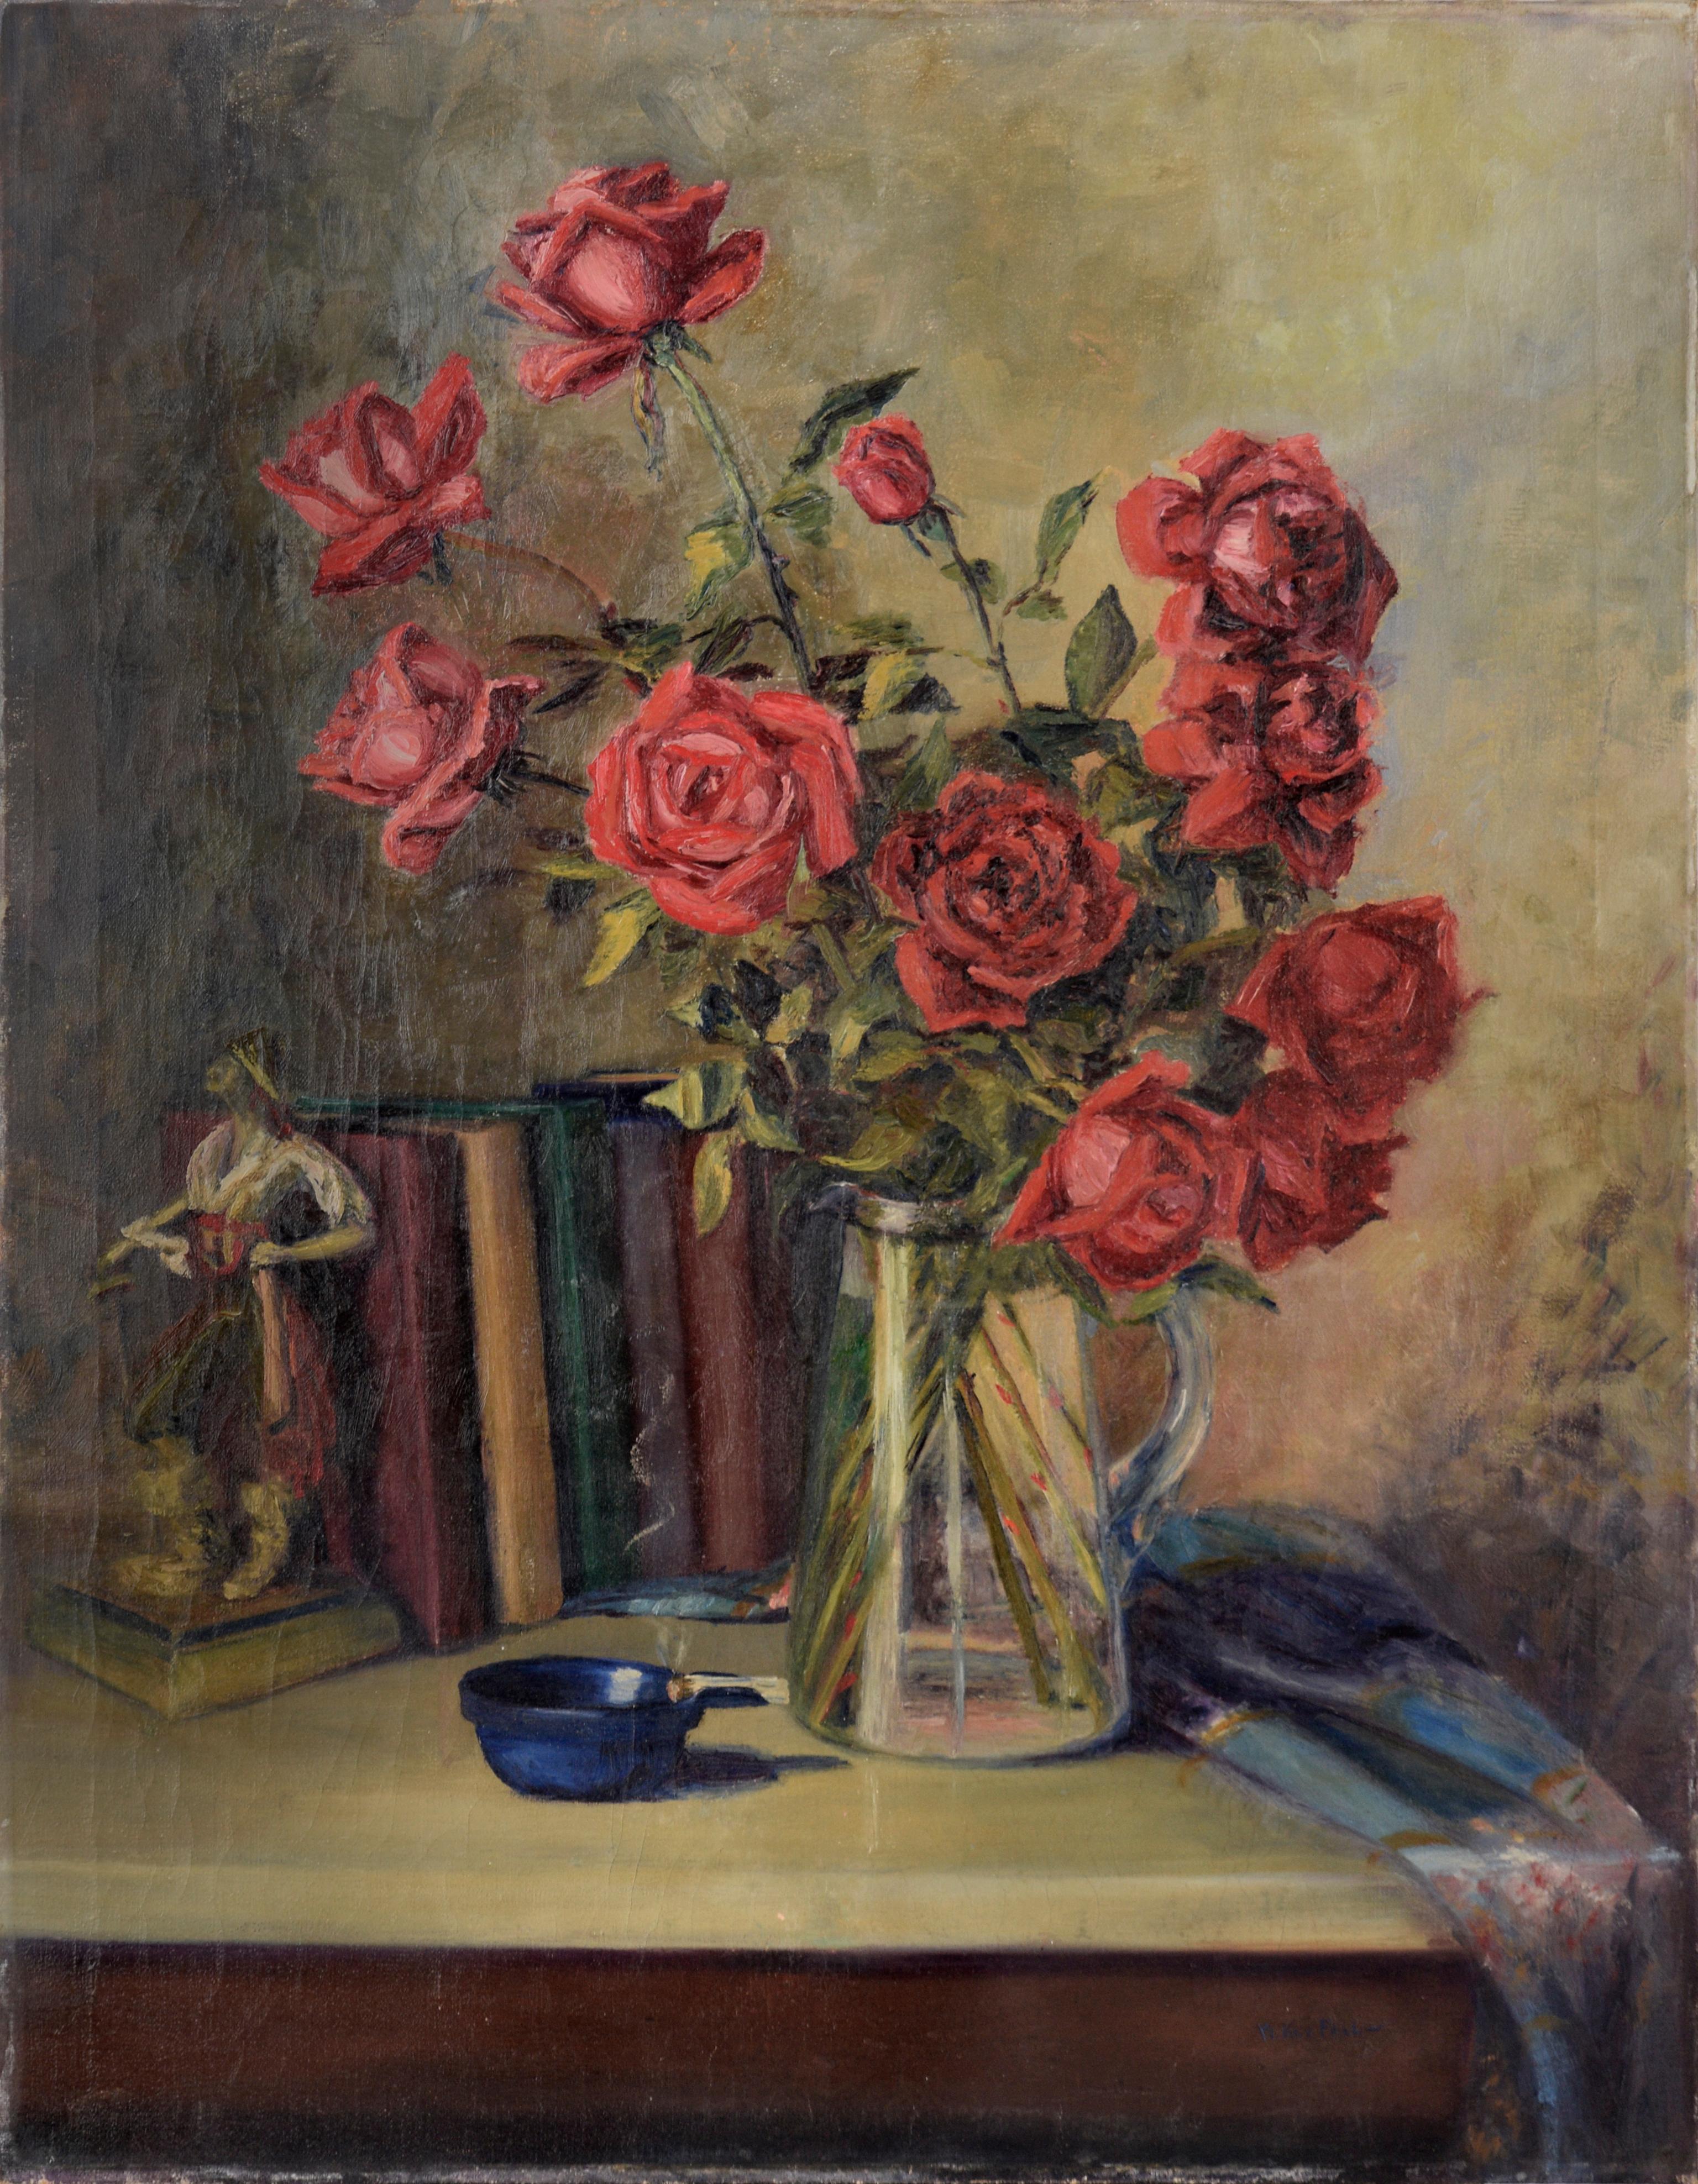 The Pirates of Penzance - Roses and Books Still Life by Willie Kay Fall - Texas  - Painting by Willa Kay Fall 